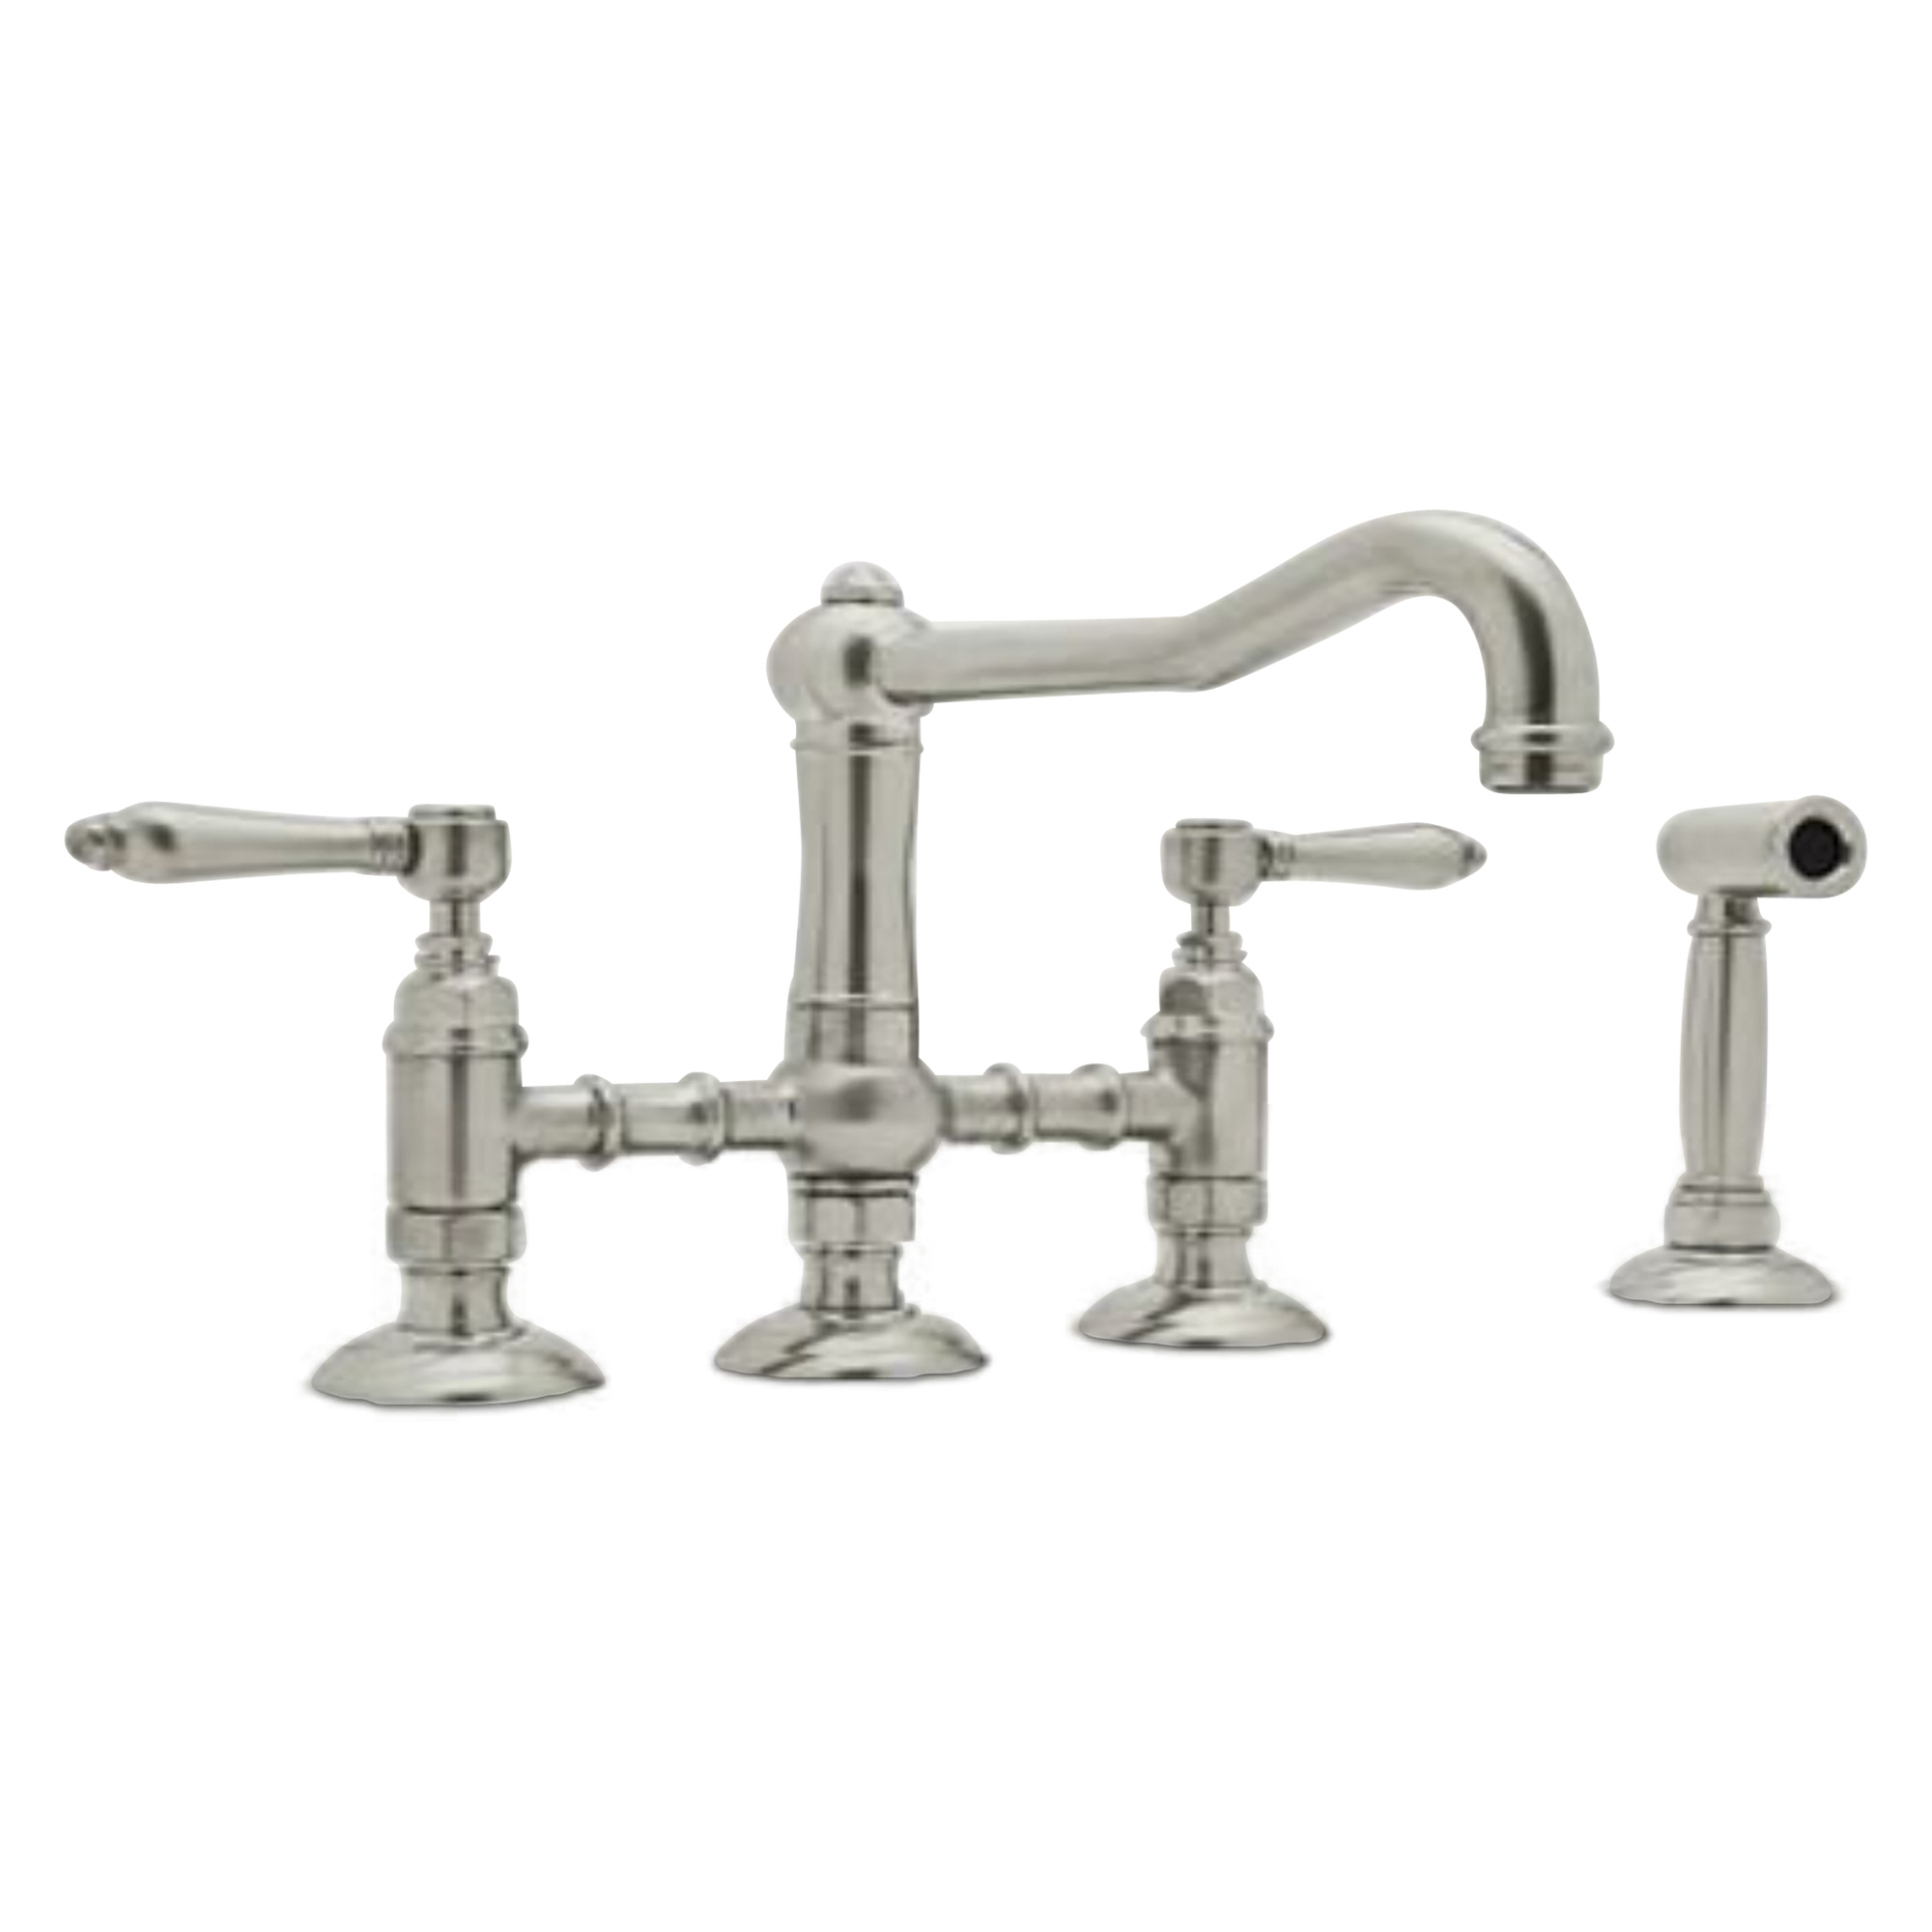 The Sifton Pillar Faucet With Spray has two metal lever handles and insulated handspray with nylon hose.